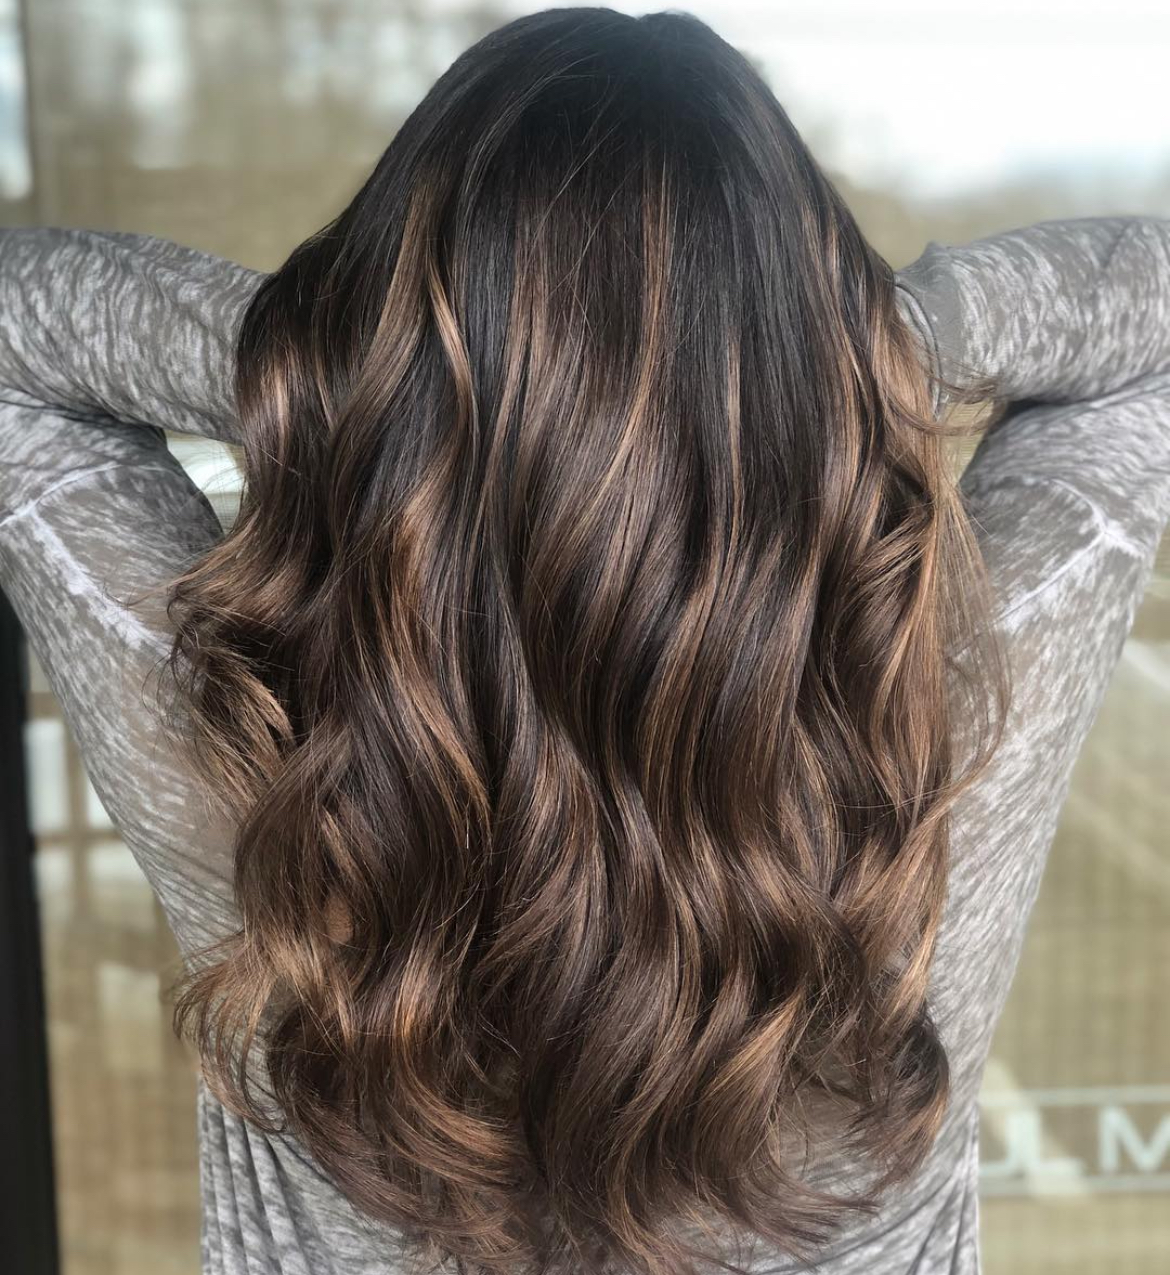 Brown hair color with highlights